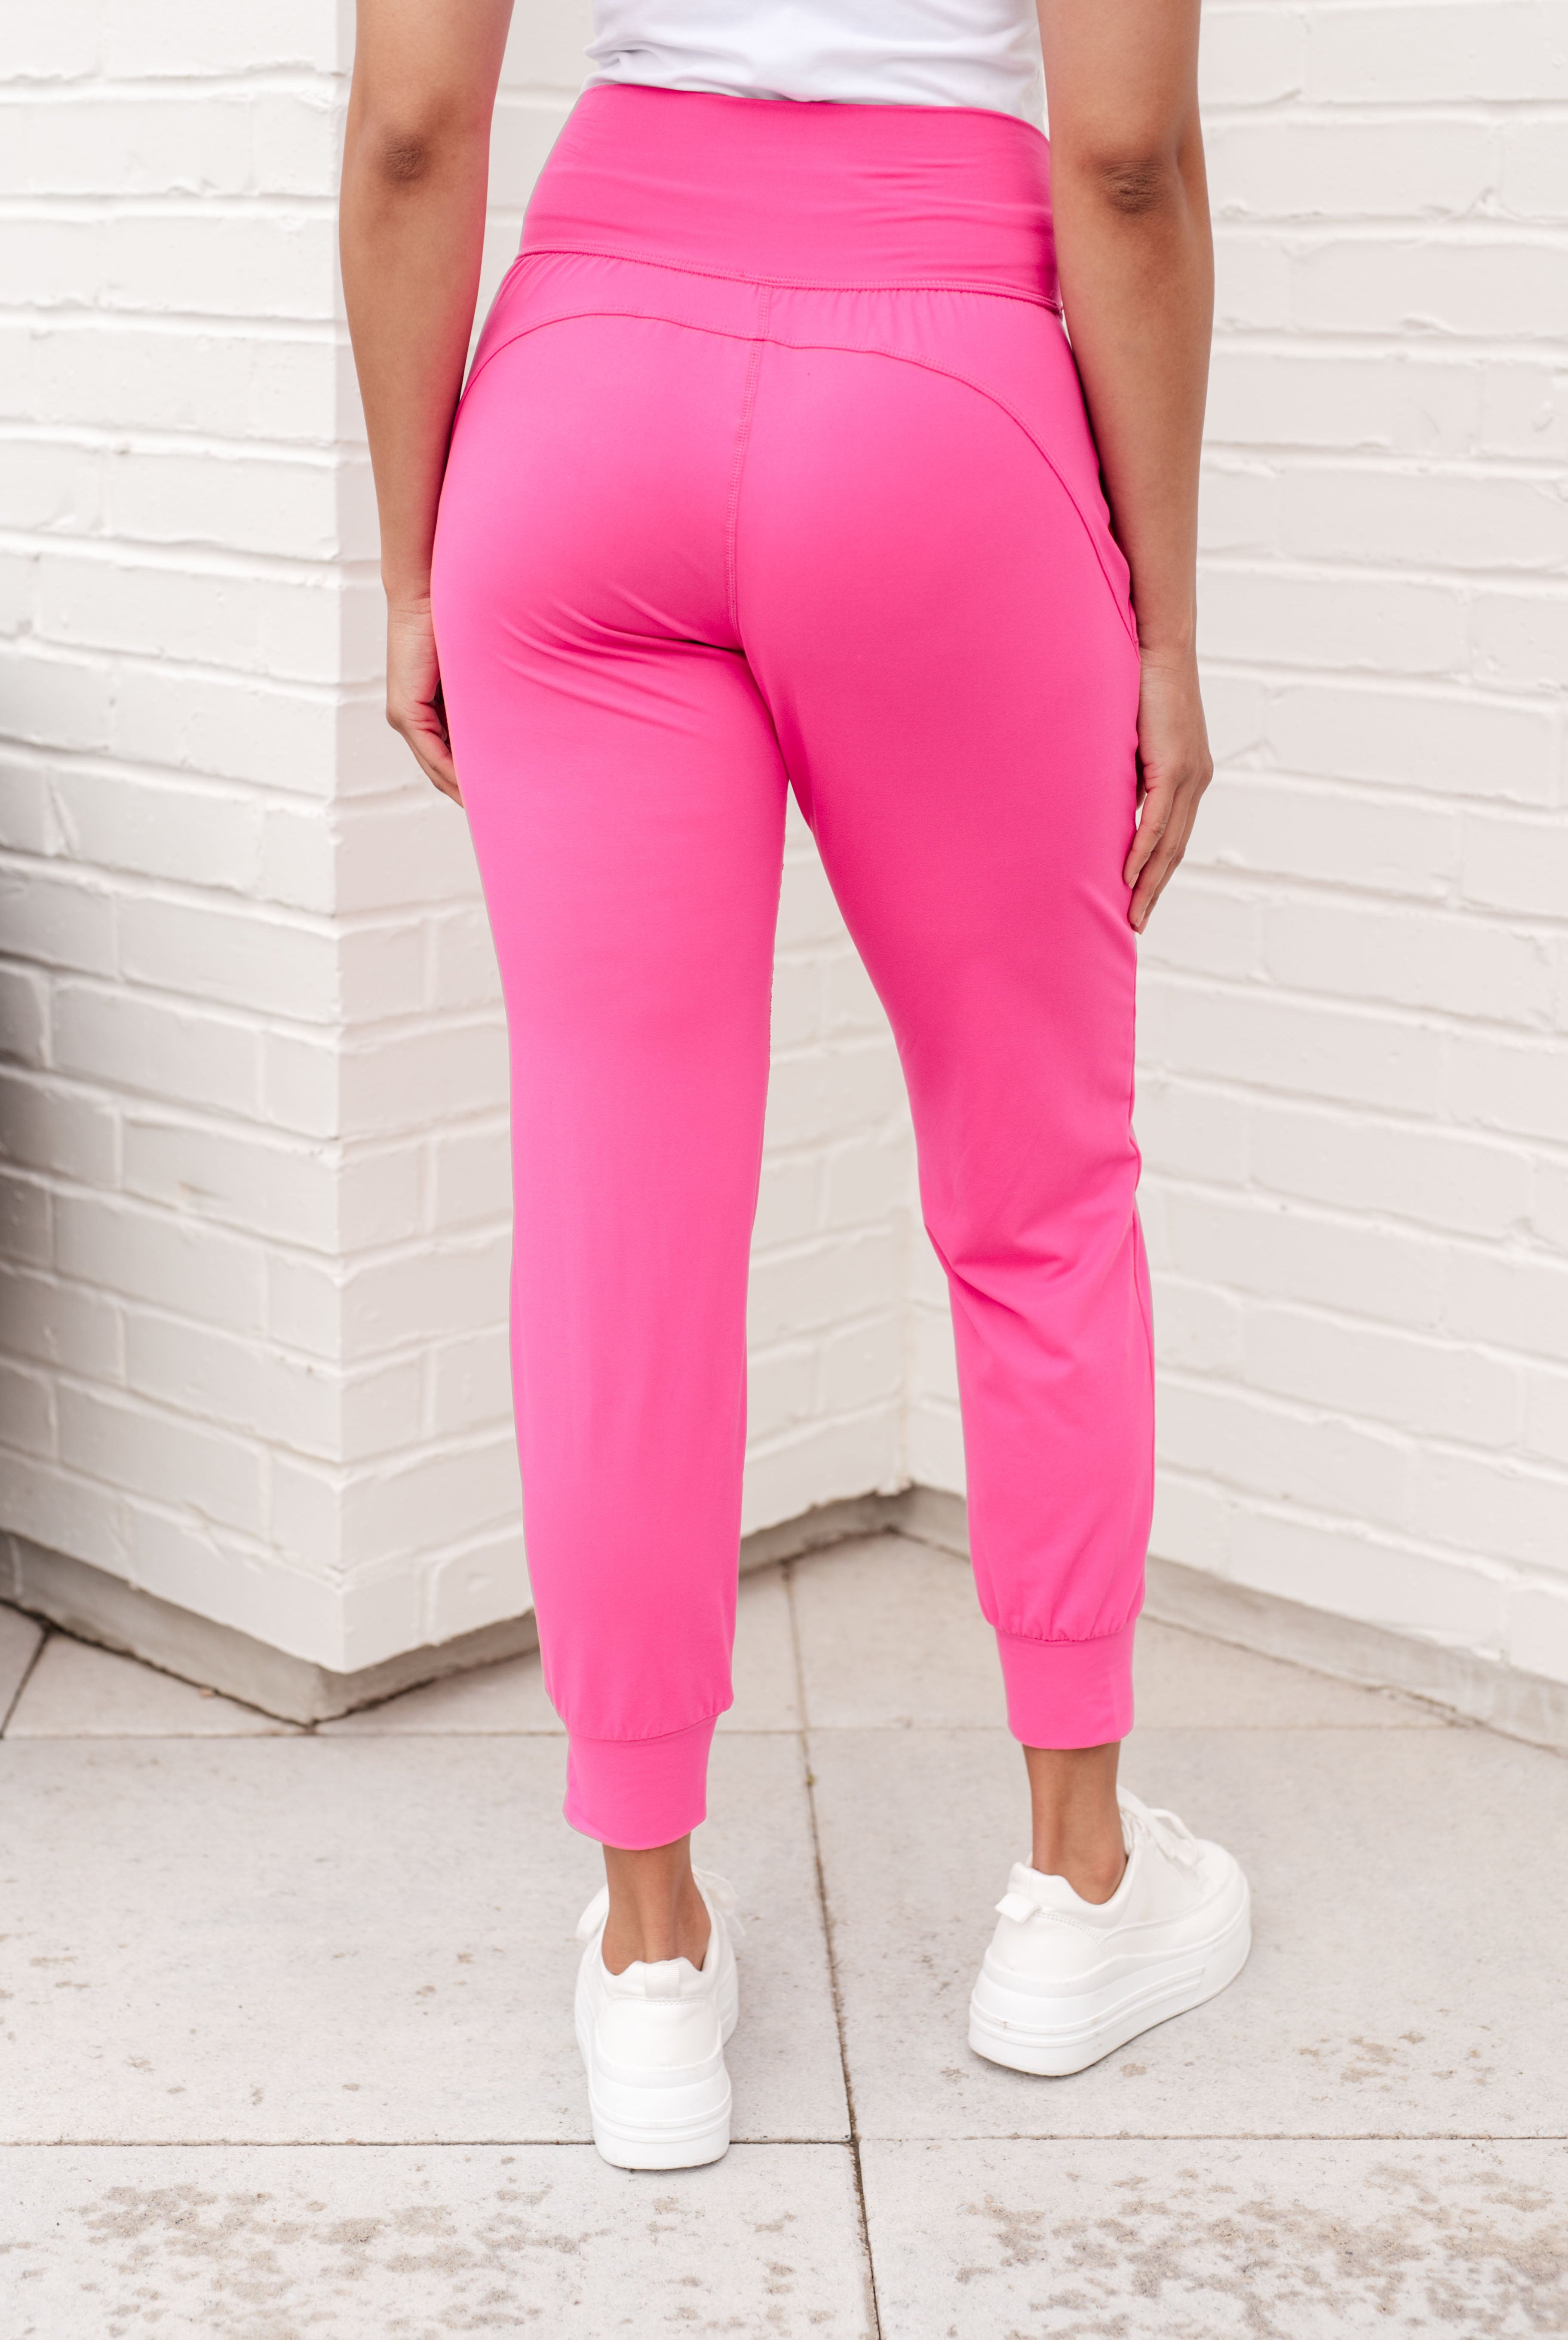 Always Accelerating Joggers in Sonic Pink-Athleisure-Ave Shops-Urban Threadz Boutique, Women's Fashion Boutique in Saugatuck, MI